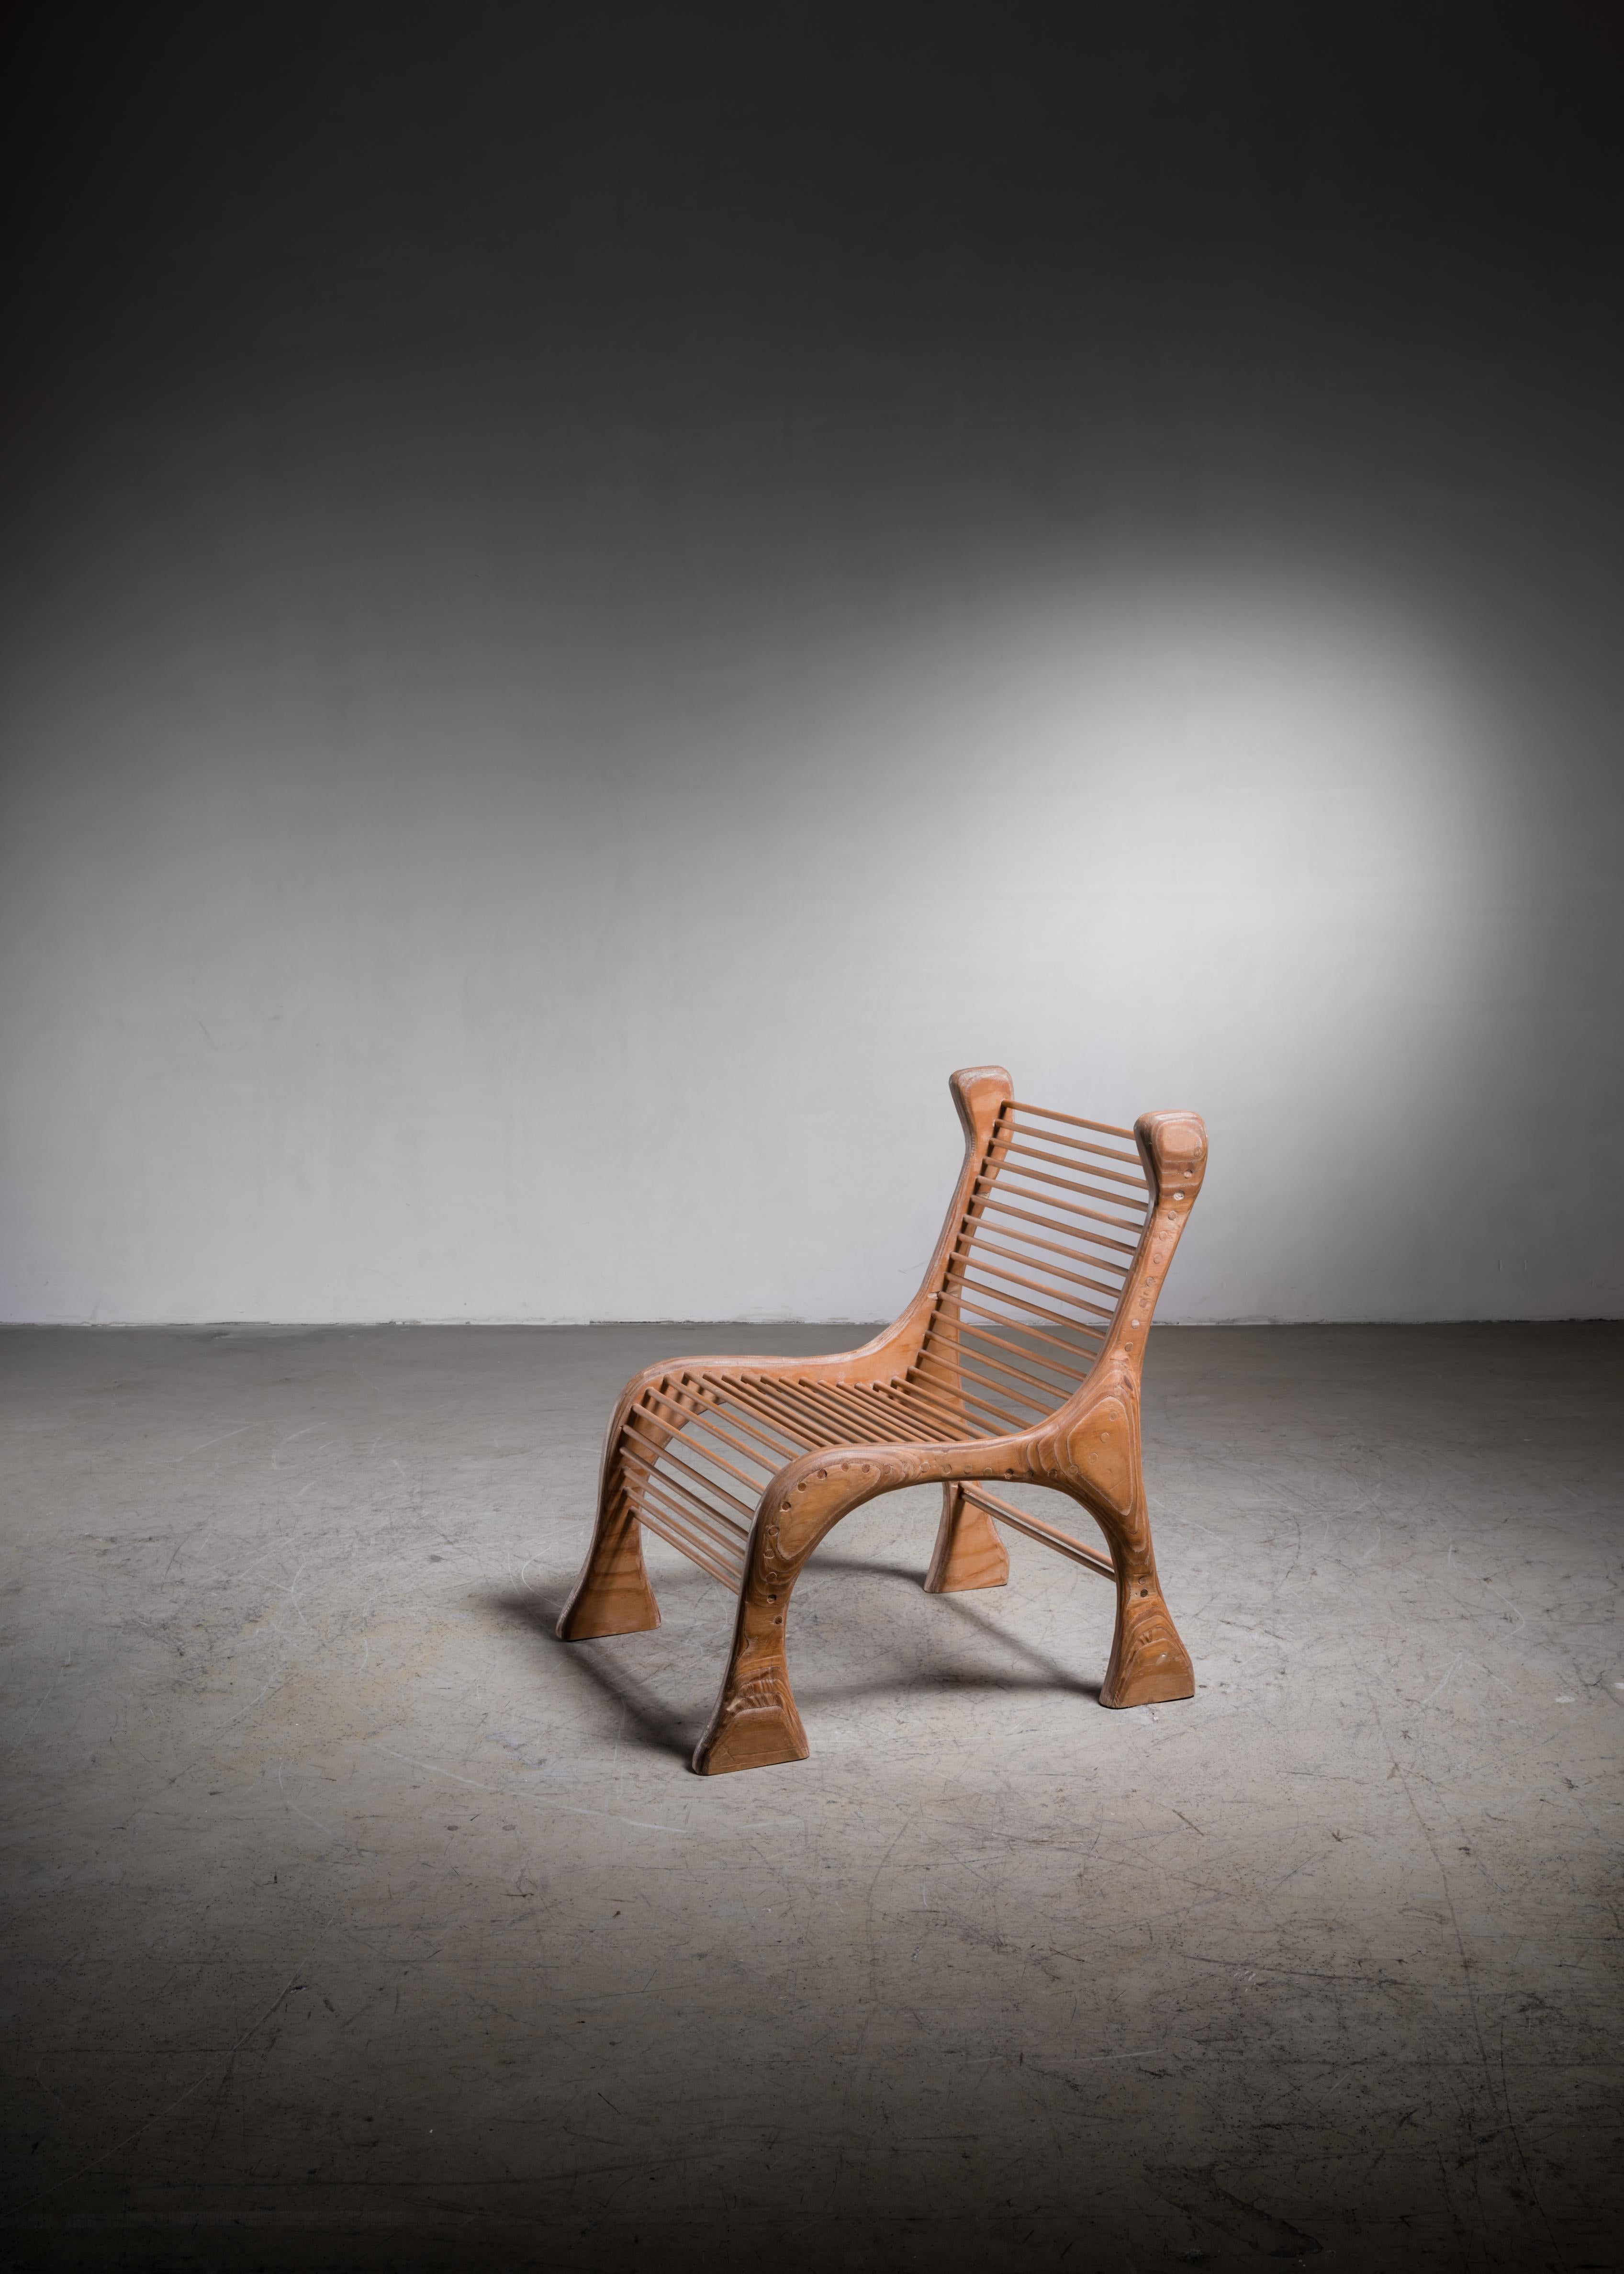 A studio crafted, sculptural lounge chair by American woodworker Robert Dice. The chair is made of a laminated frame in Finland birch with an amazing organic structure and maple dowels that form the seat and backrest.